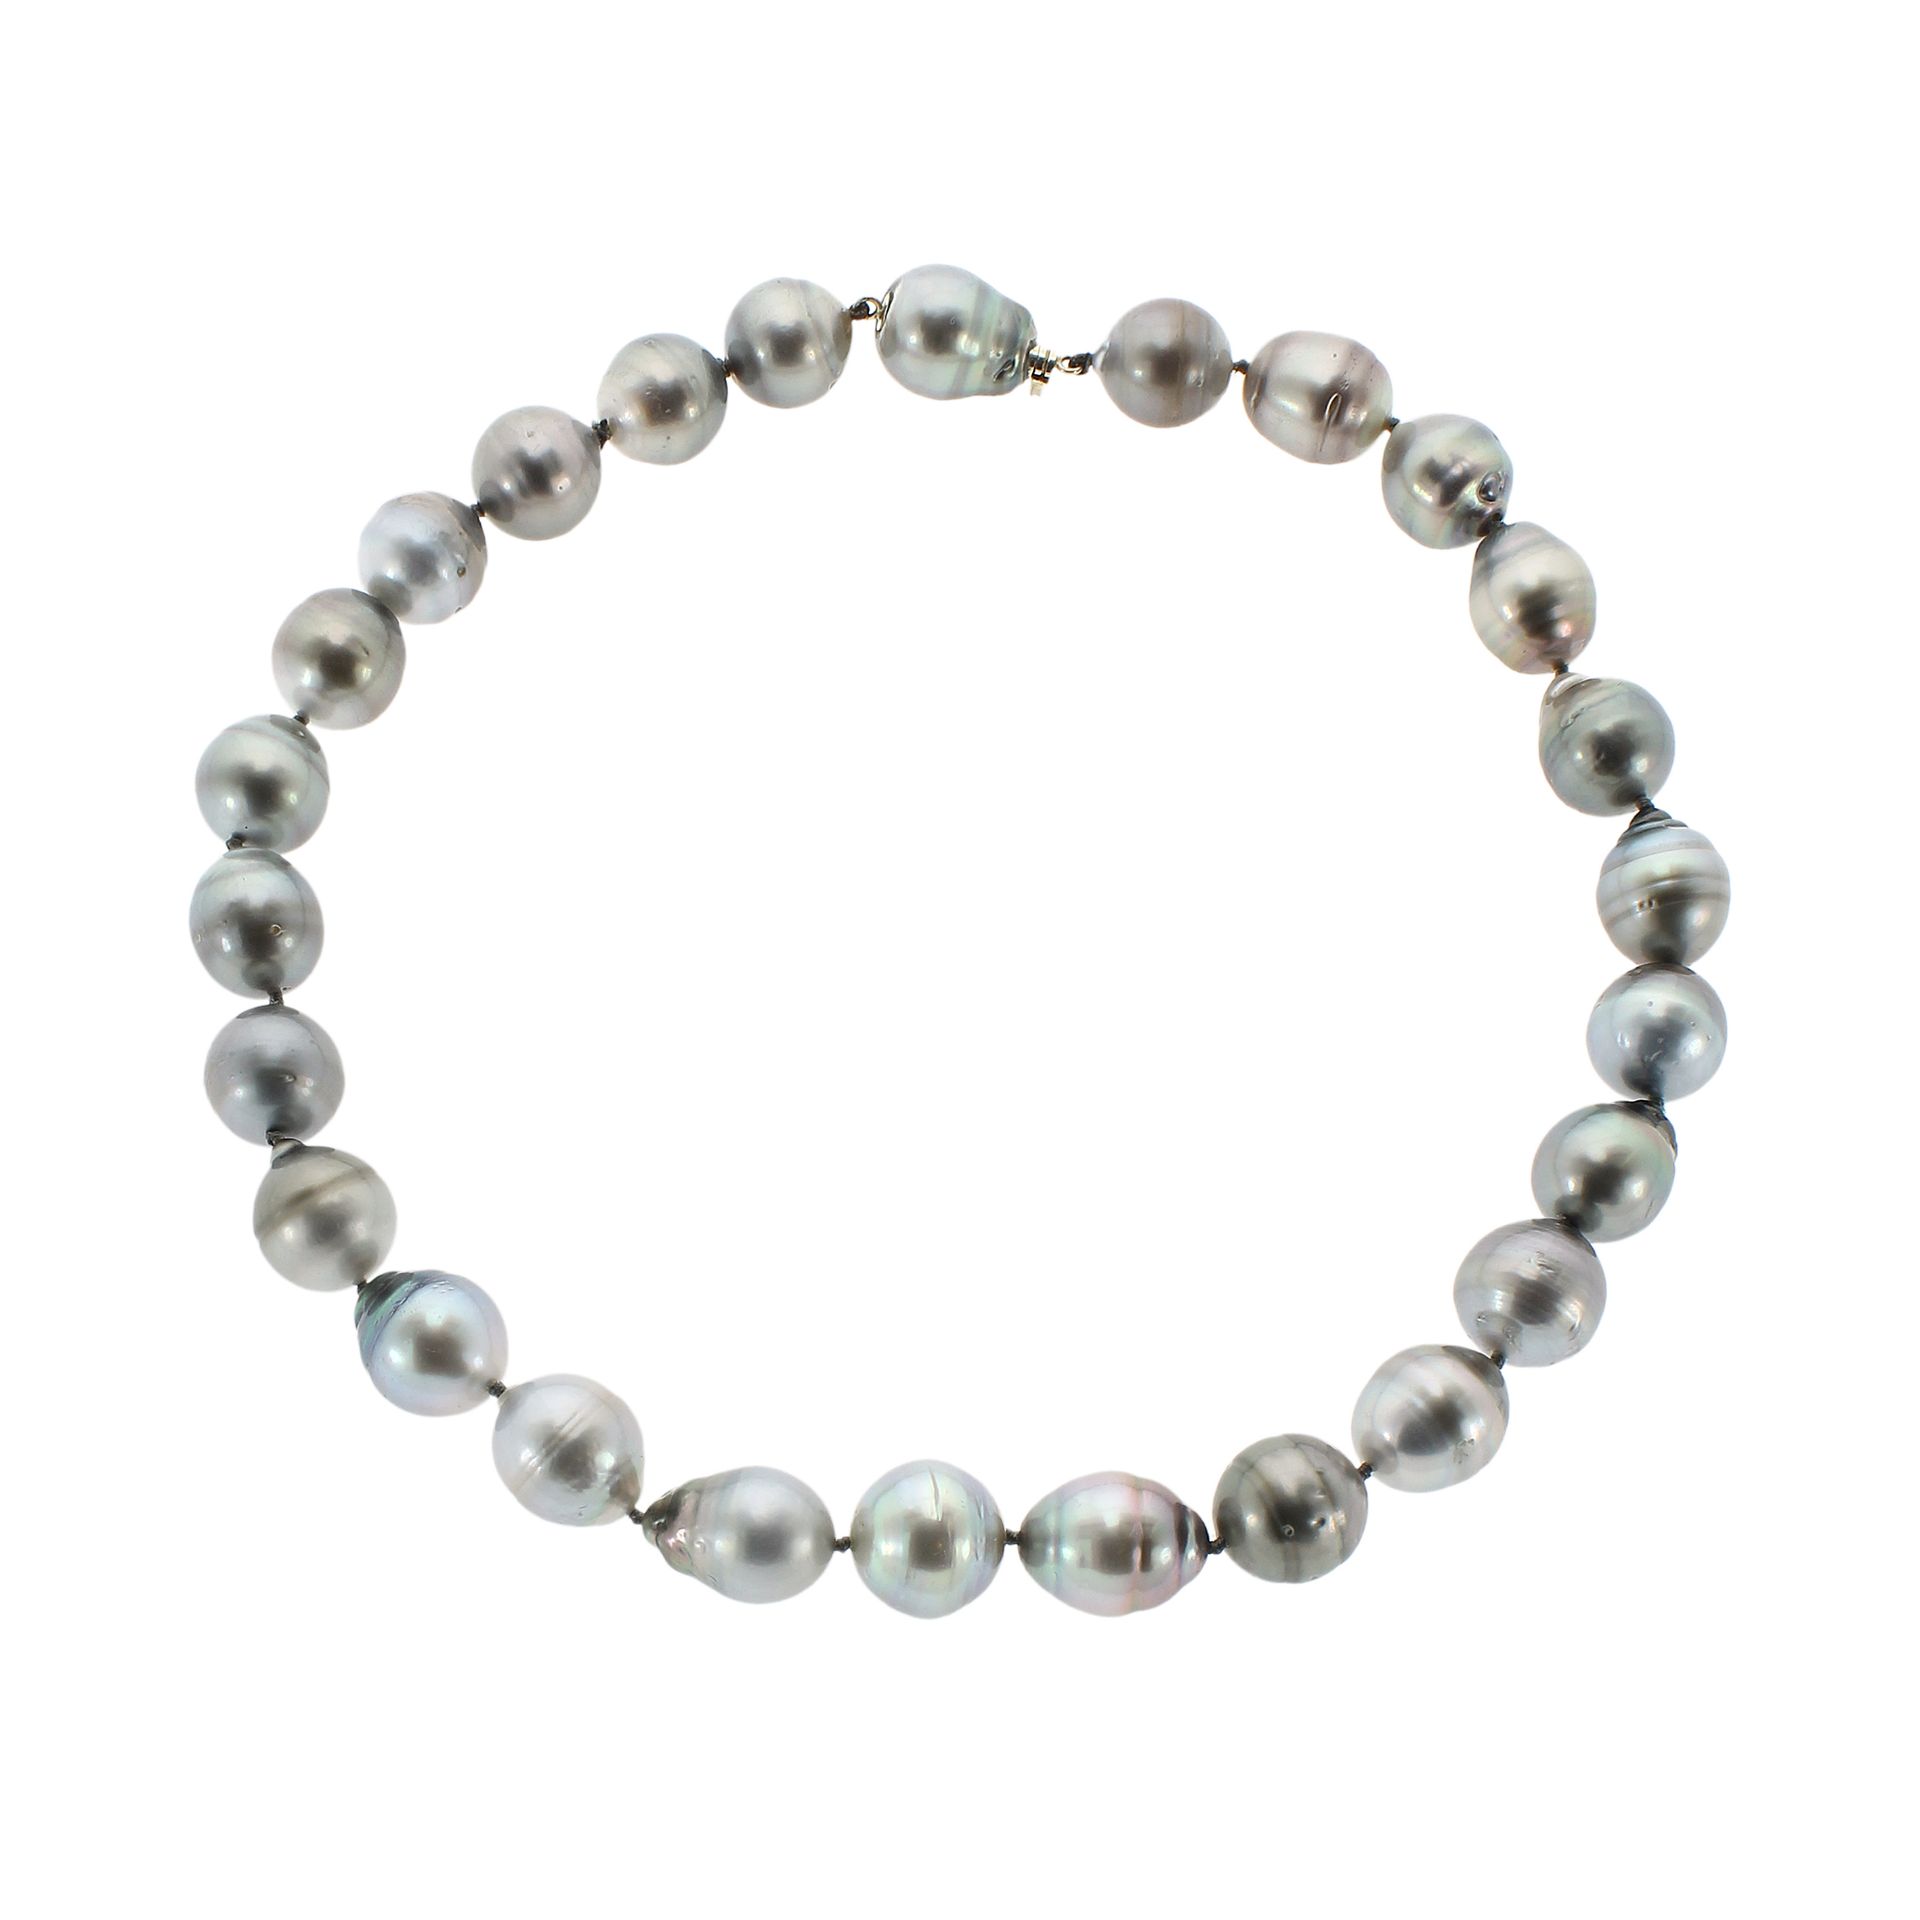 A TAHITIAN PEARL NECKLACE comprising a single row of twenty-six silvery-grey pearls of approximately